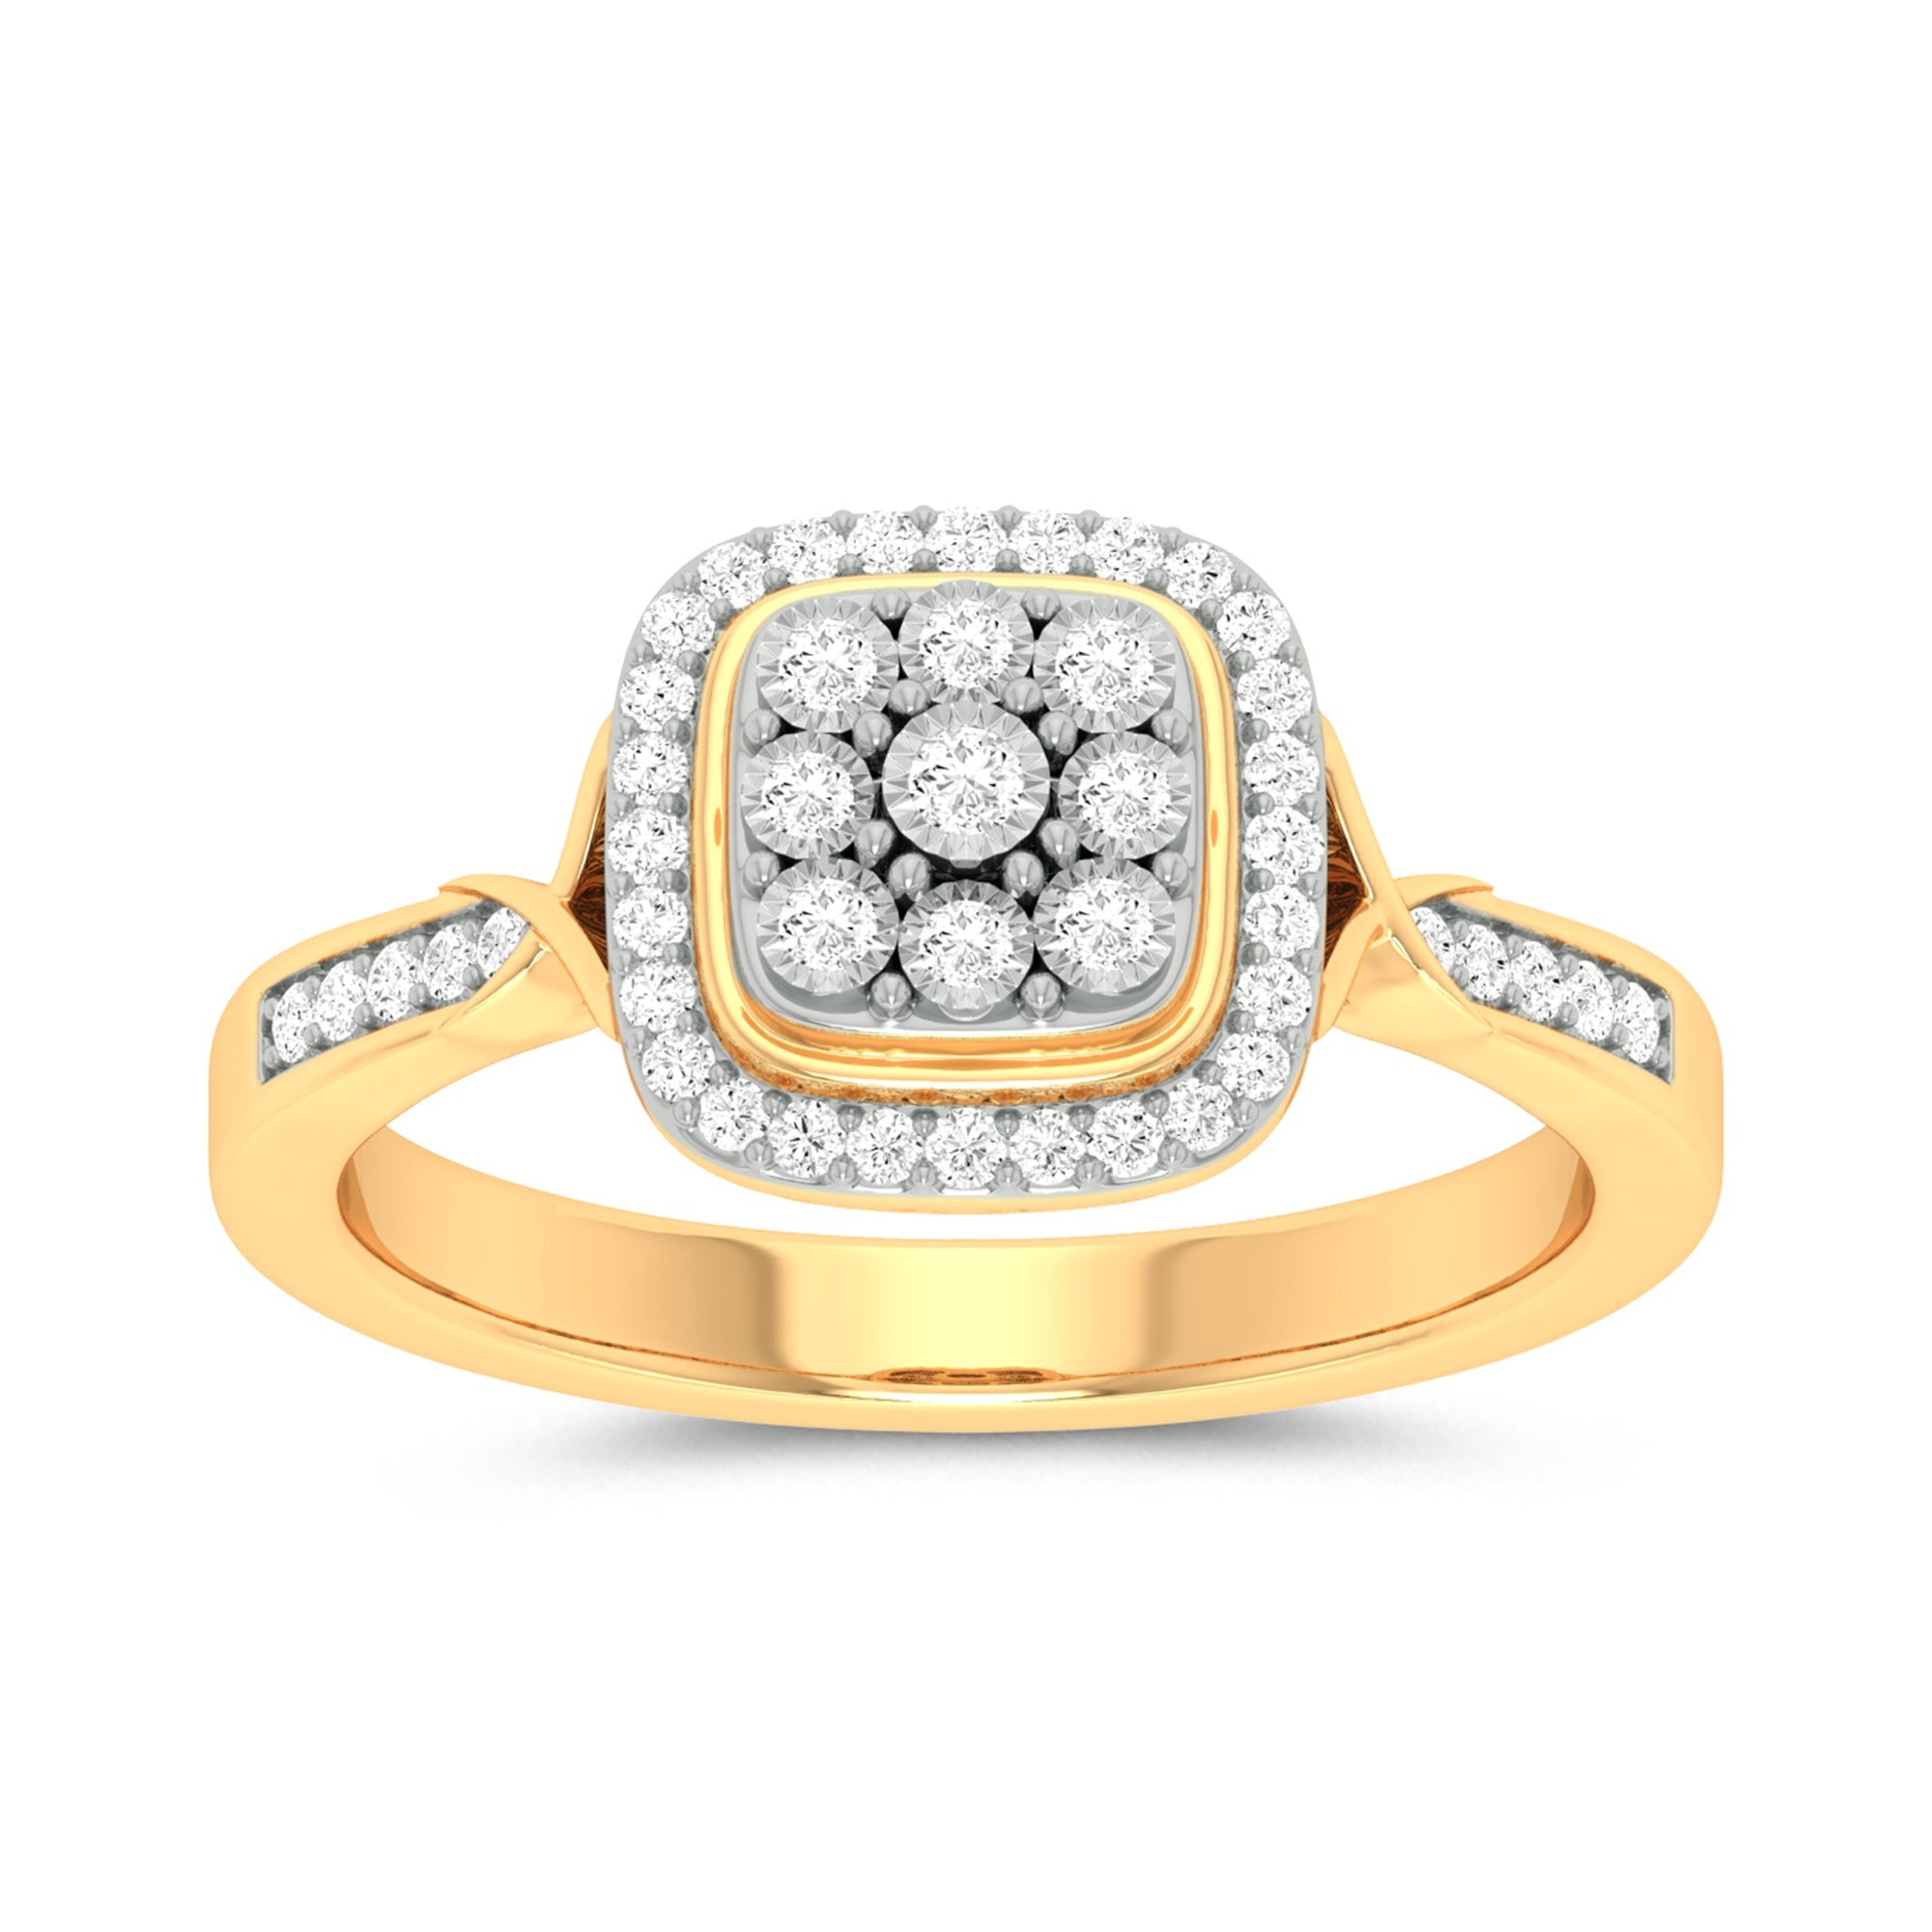 Meera Miracle Bezel Ring with 1/5ct of Laboratory Grown Diamonds in 9ct Yellow Gold Rings Bevilles 